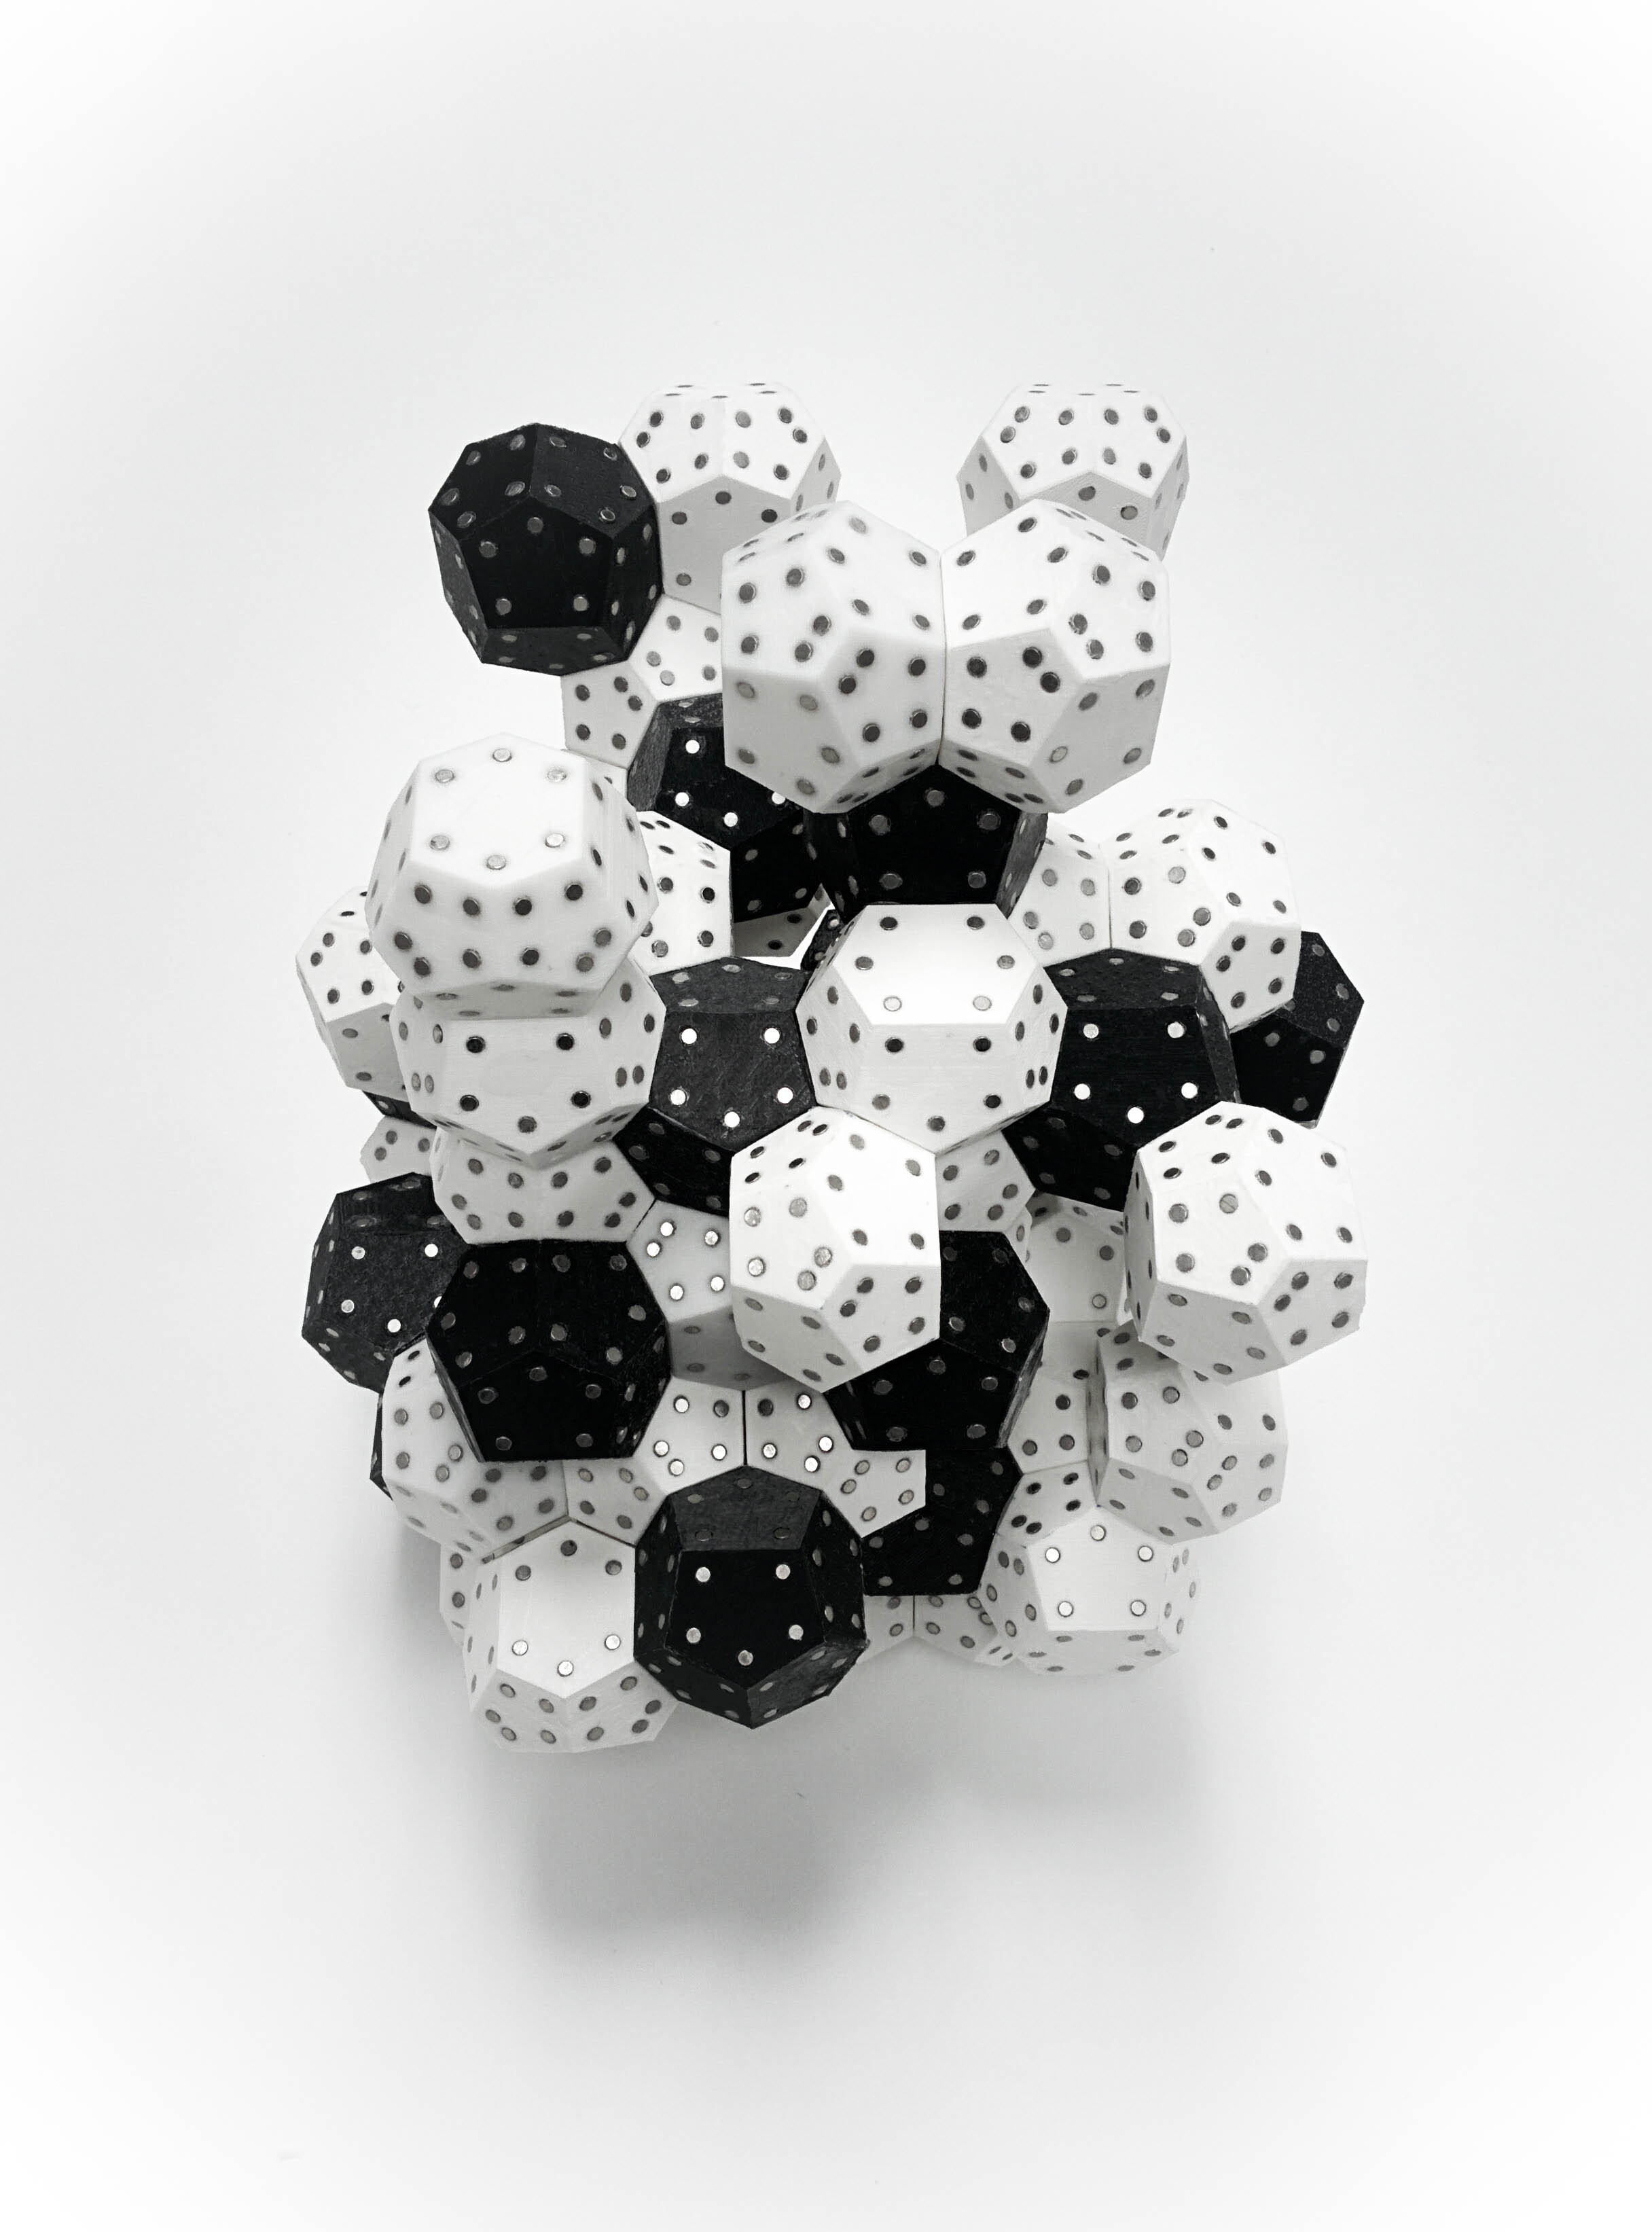 A collection of multi-sided geometric forms. Some black, some white, all with small dots on each face. They are stacked on top of each other to form a clustered structure. 